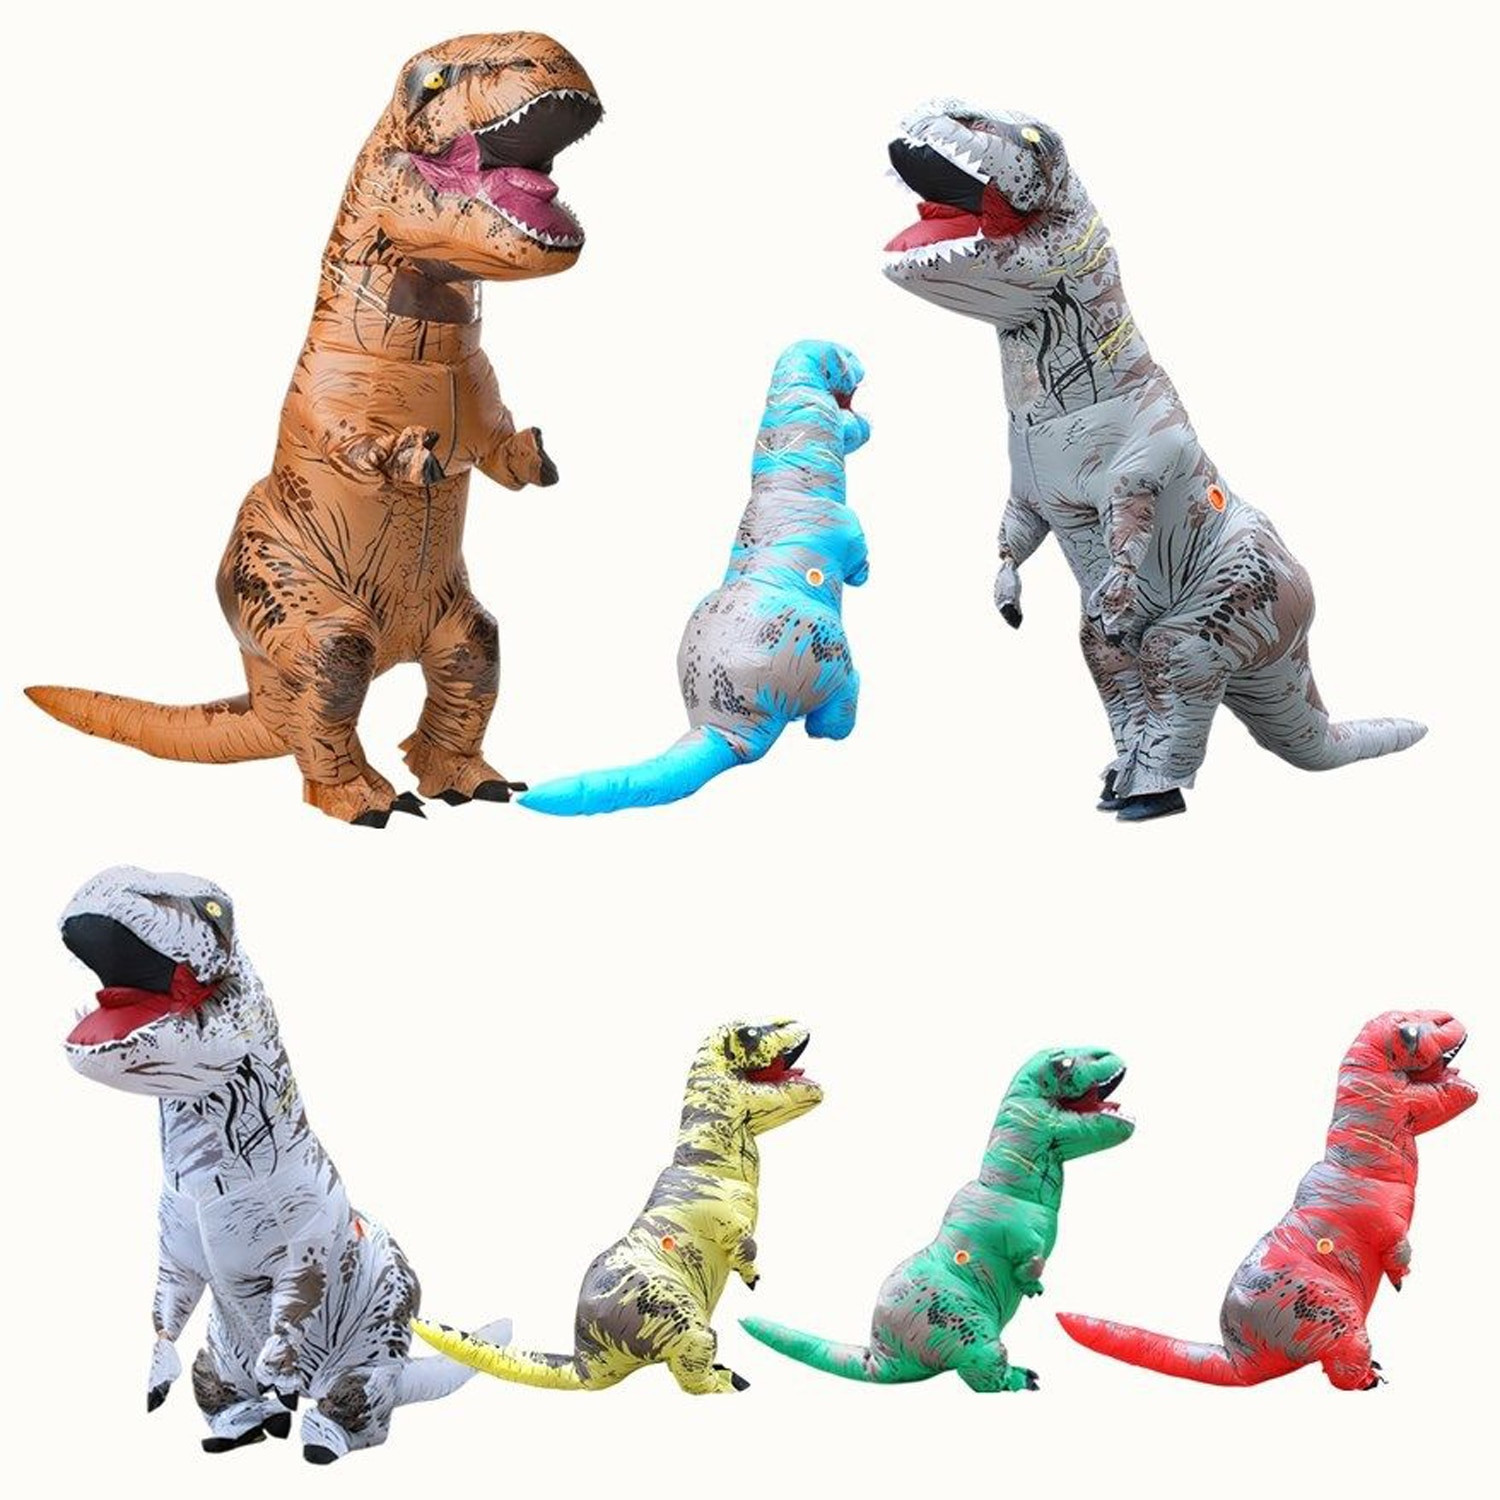 DIY Dinosaur Costumes For Adults
 Adult T REX Inflatable Costume Halloween Cosplay Jurassic